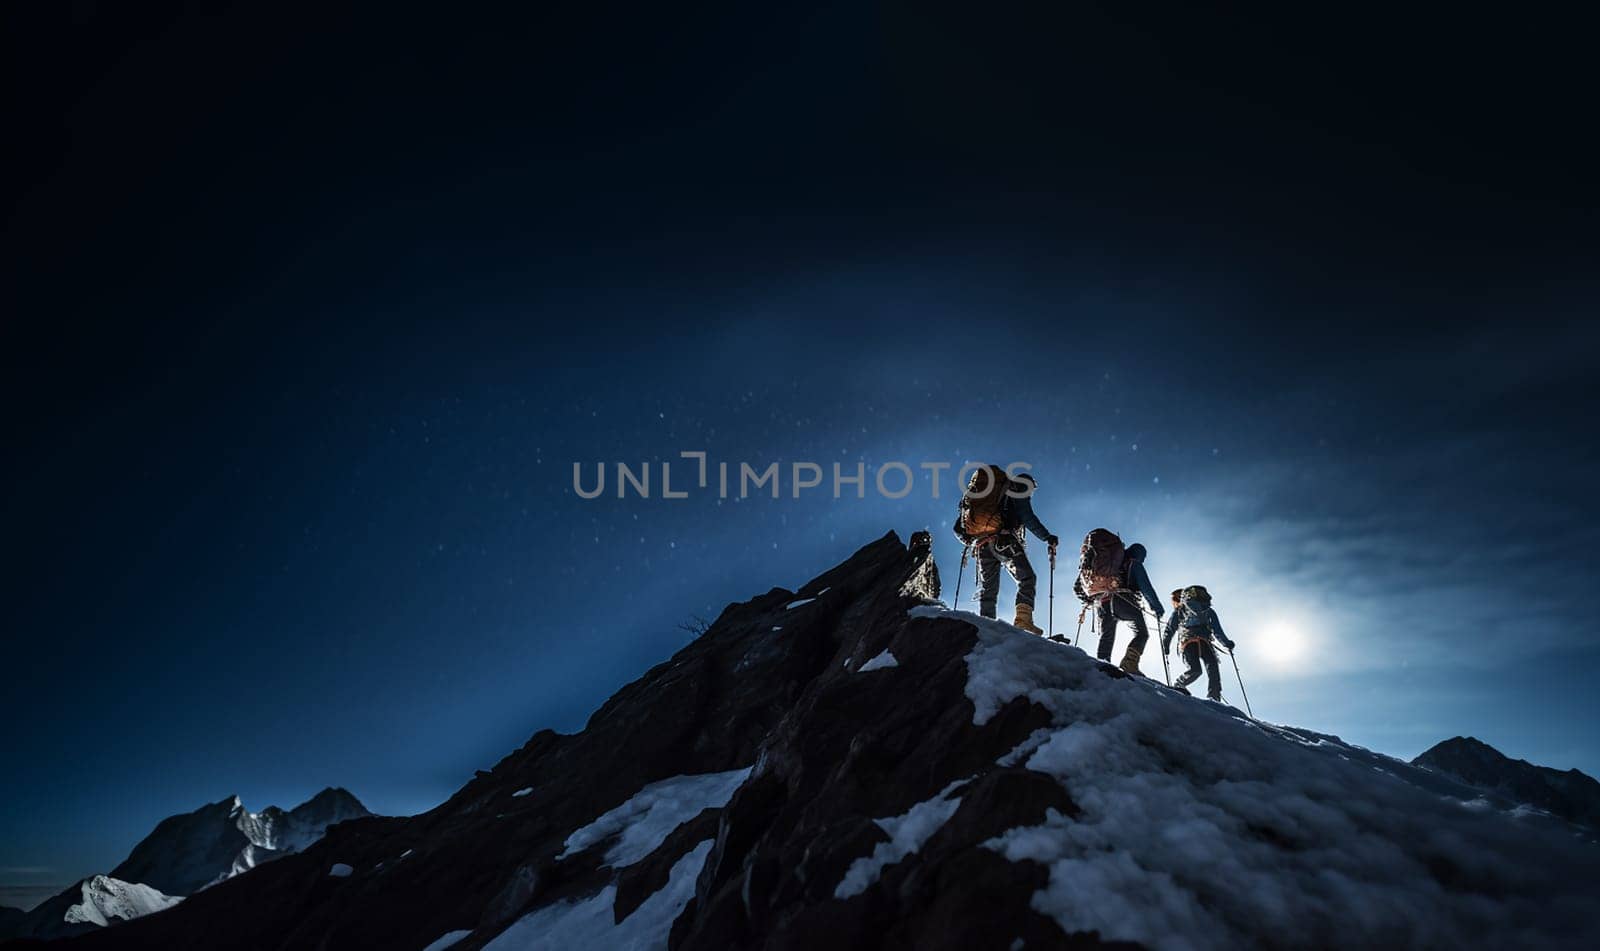 Hikers climber walking in the mountains by night, mountaineers trekking in the cold night. Team of hiker climbers with beautiful galaxy starry sky by Annebel146